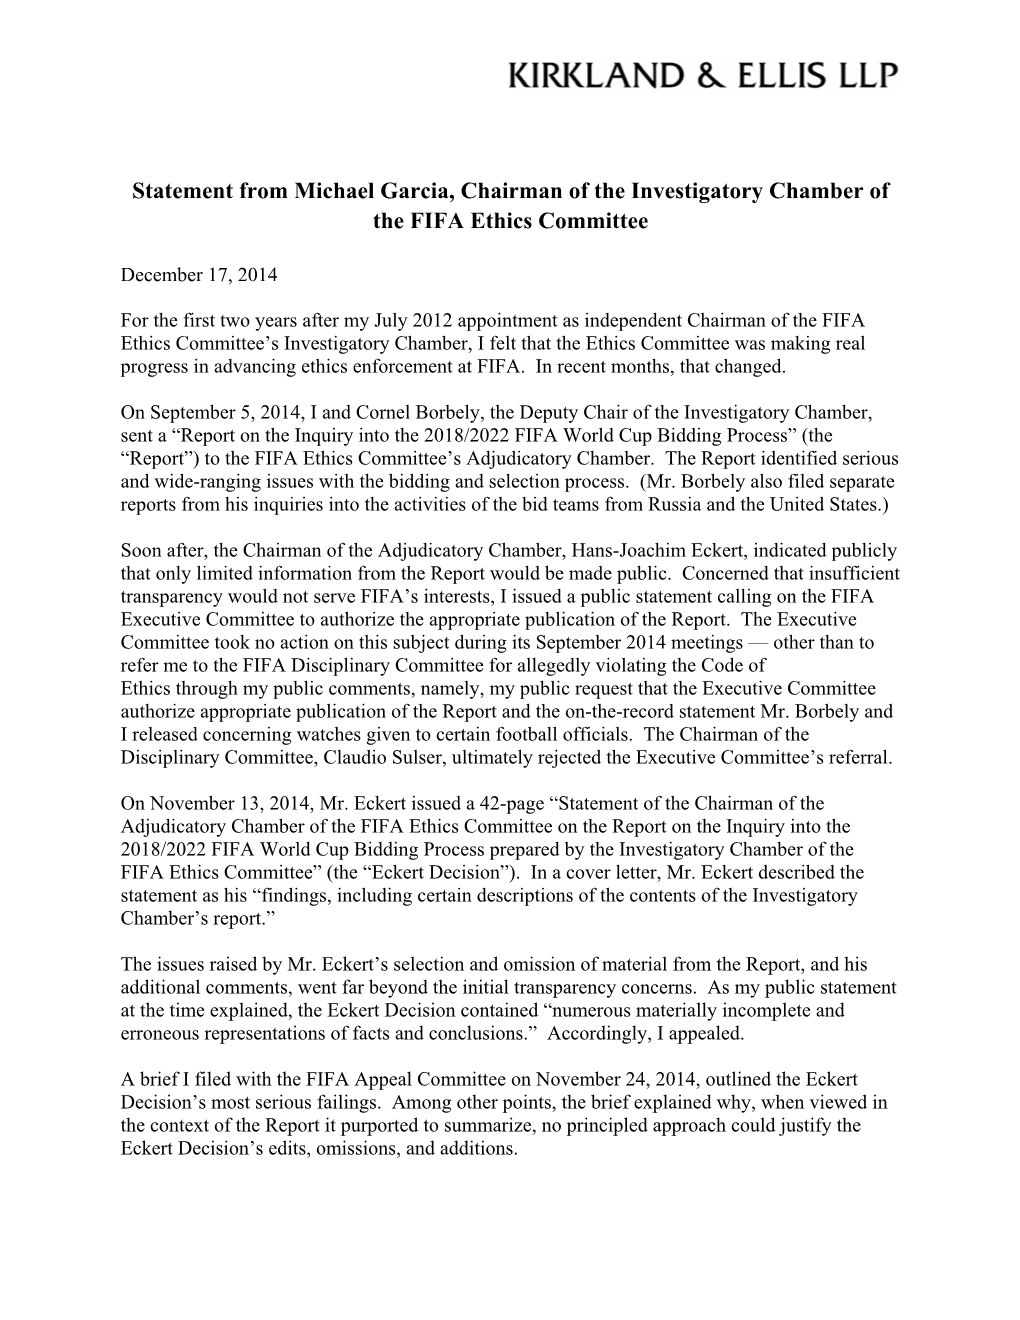 Statement from Michael Garcia, Chairman of the Investigatory Chamber of the FIFA Ethics Committee